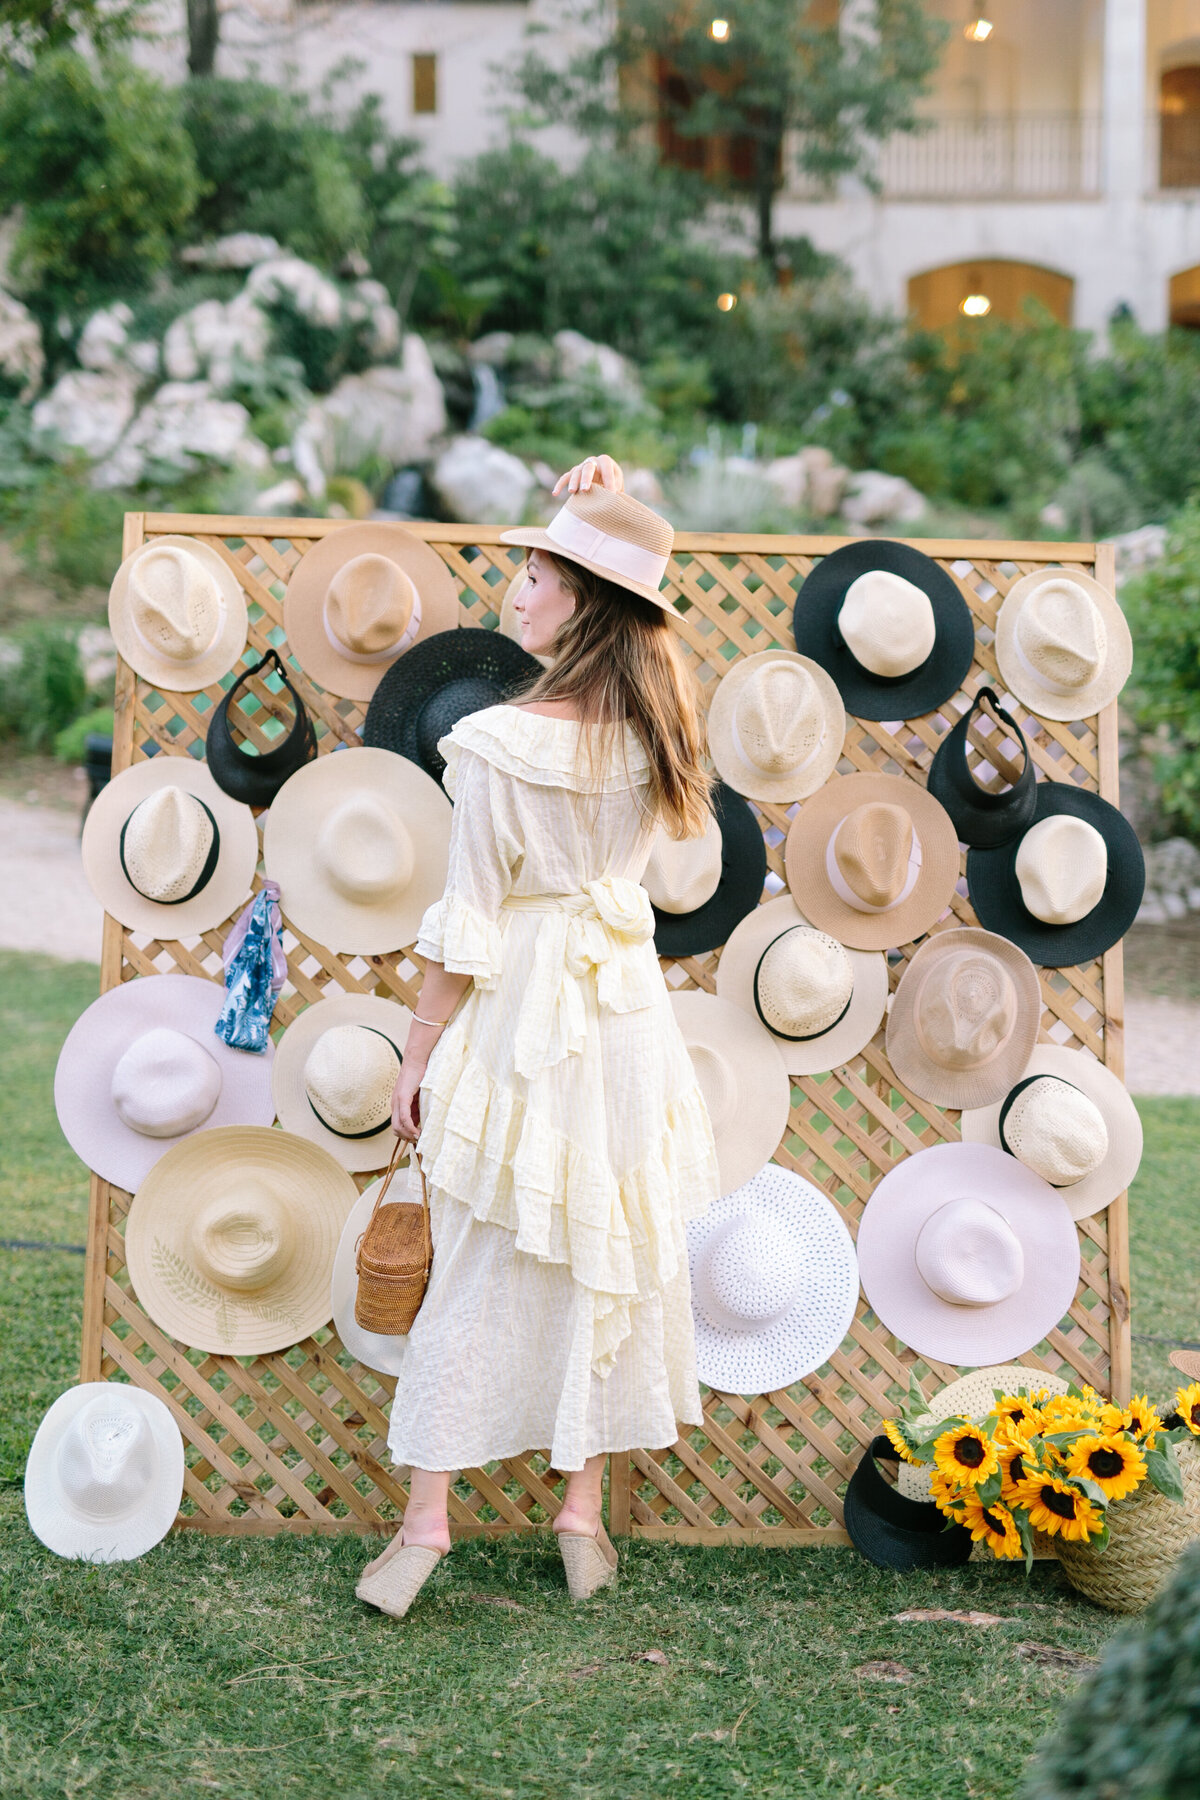 Boho chic decor with a straw hat wall